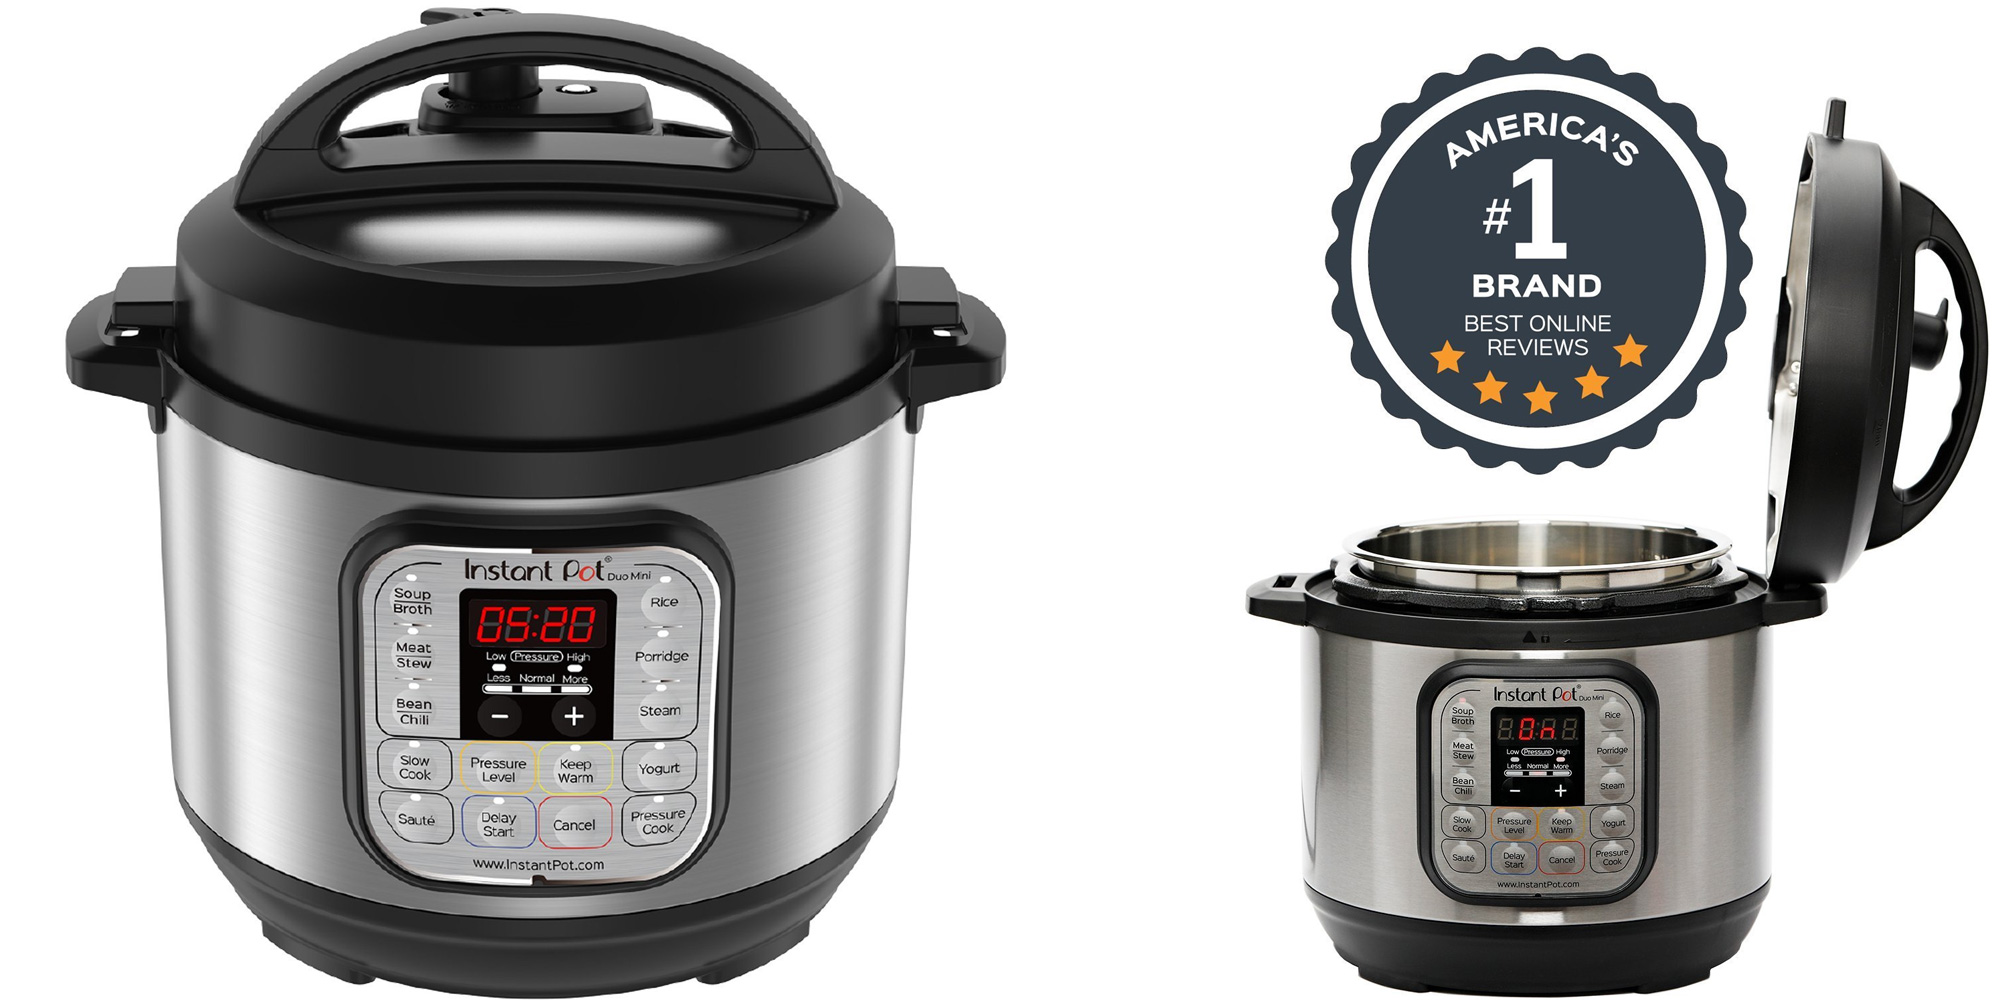 The Instant Pot Duo Mini is at its lowest price ever on